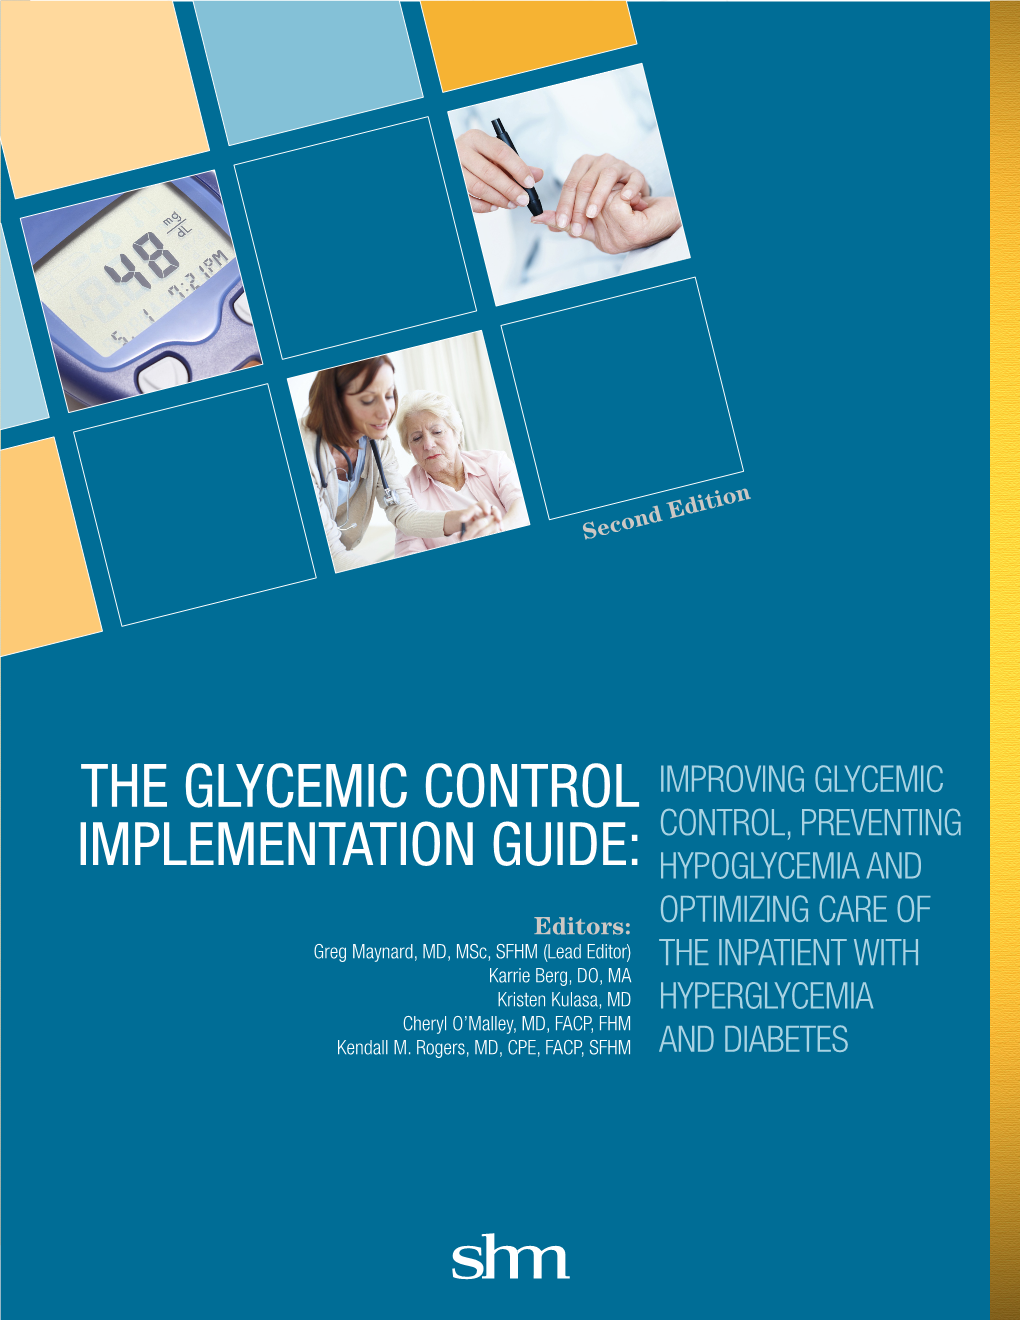 The Glycemic Control Implementation Guide